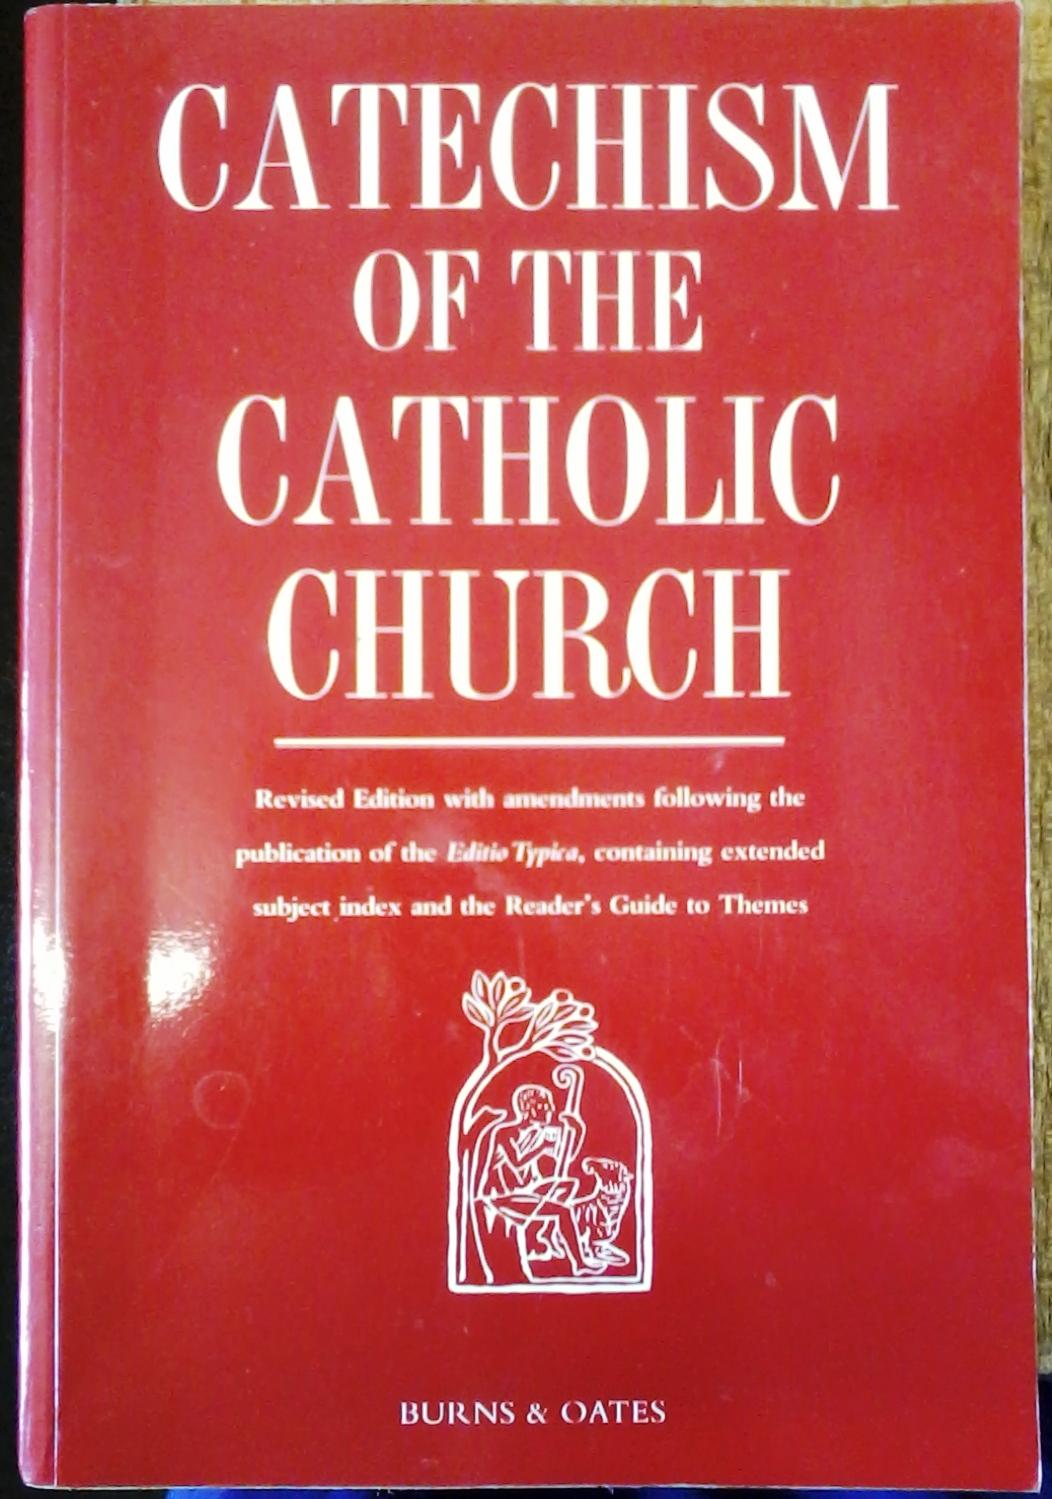 catechism of the catholic church